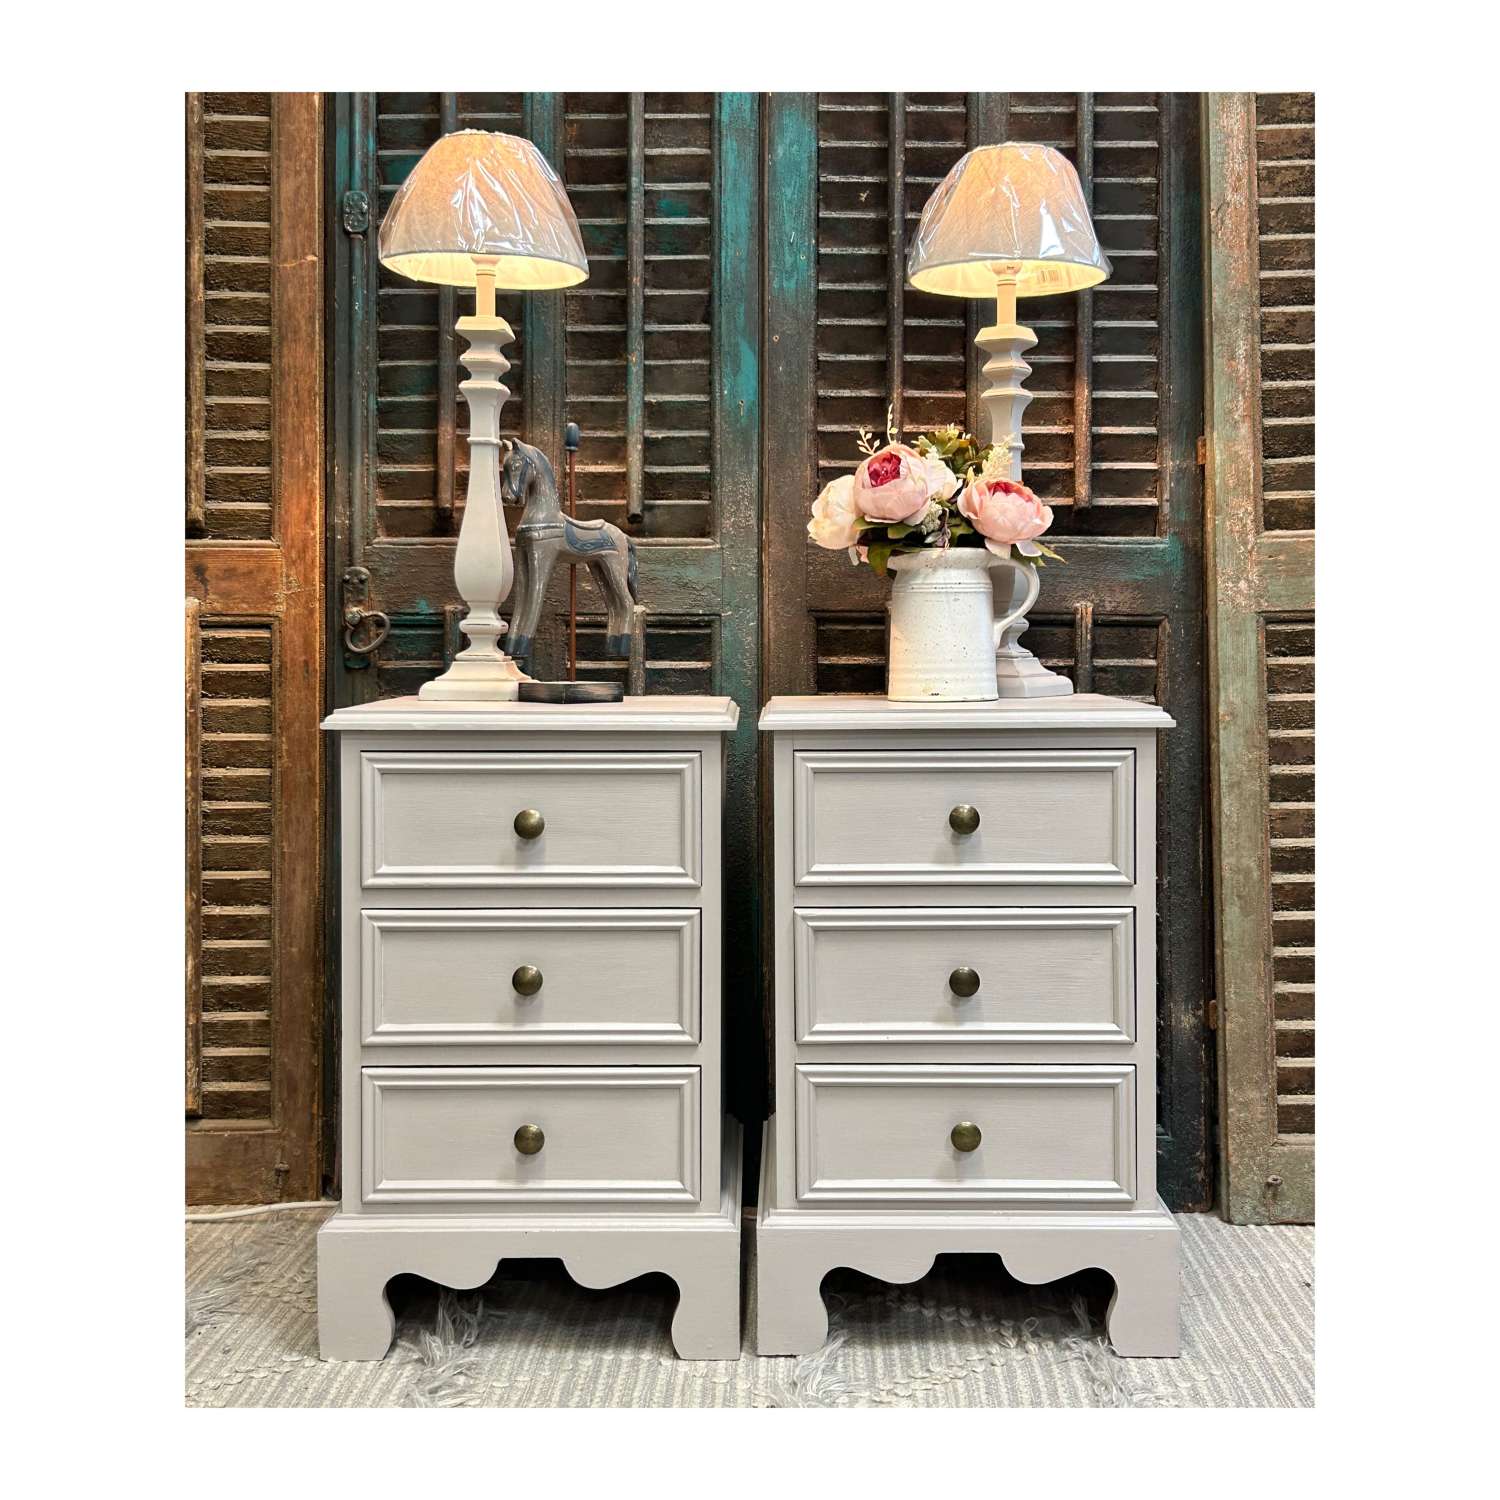 Pair of Painted Bedside Cabinets, Drawers , Bedside Tables